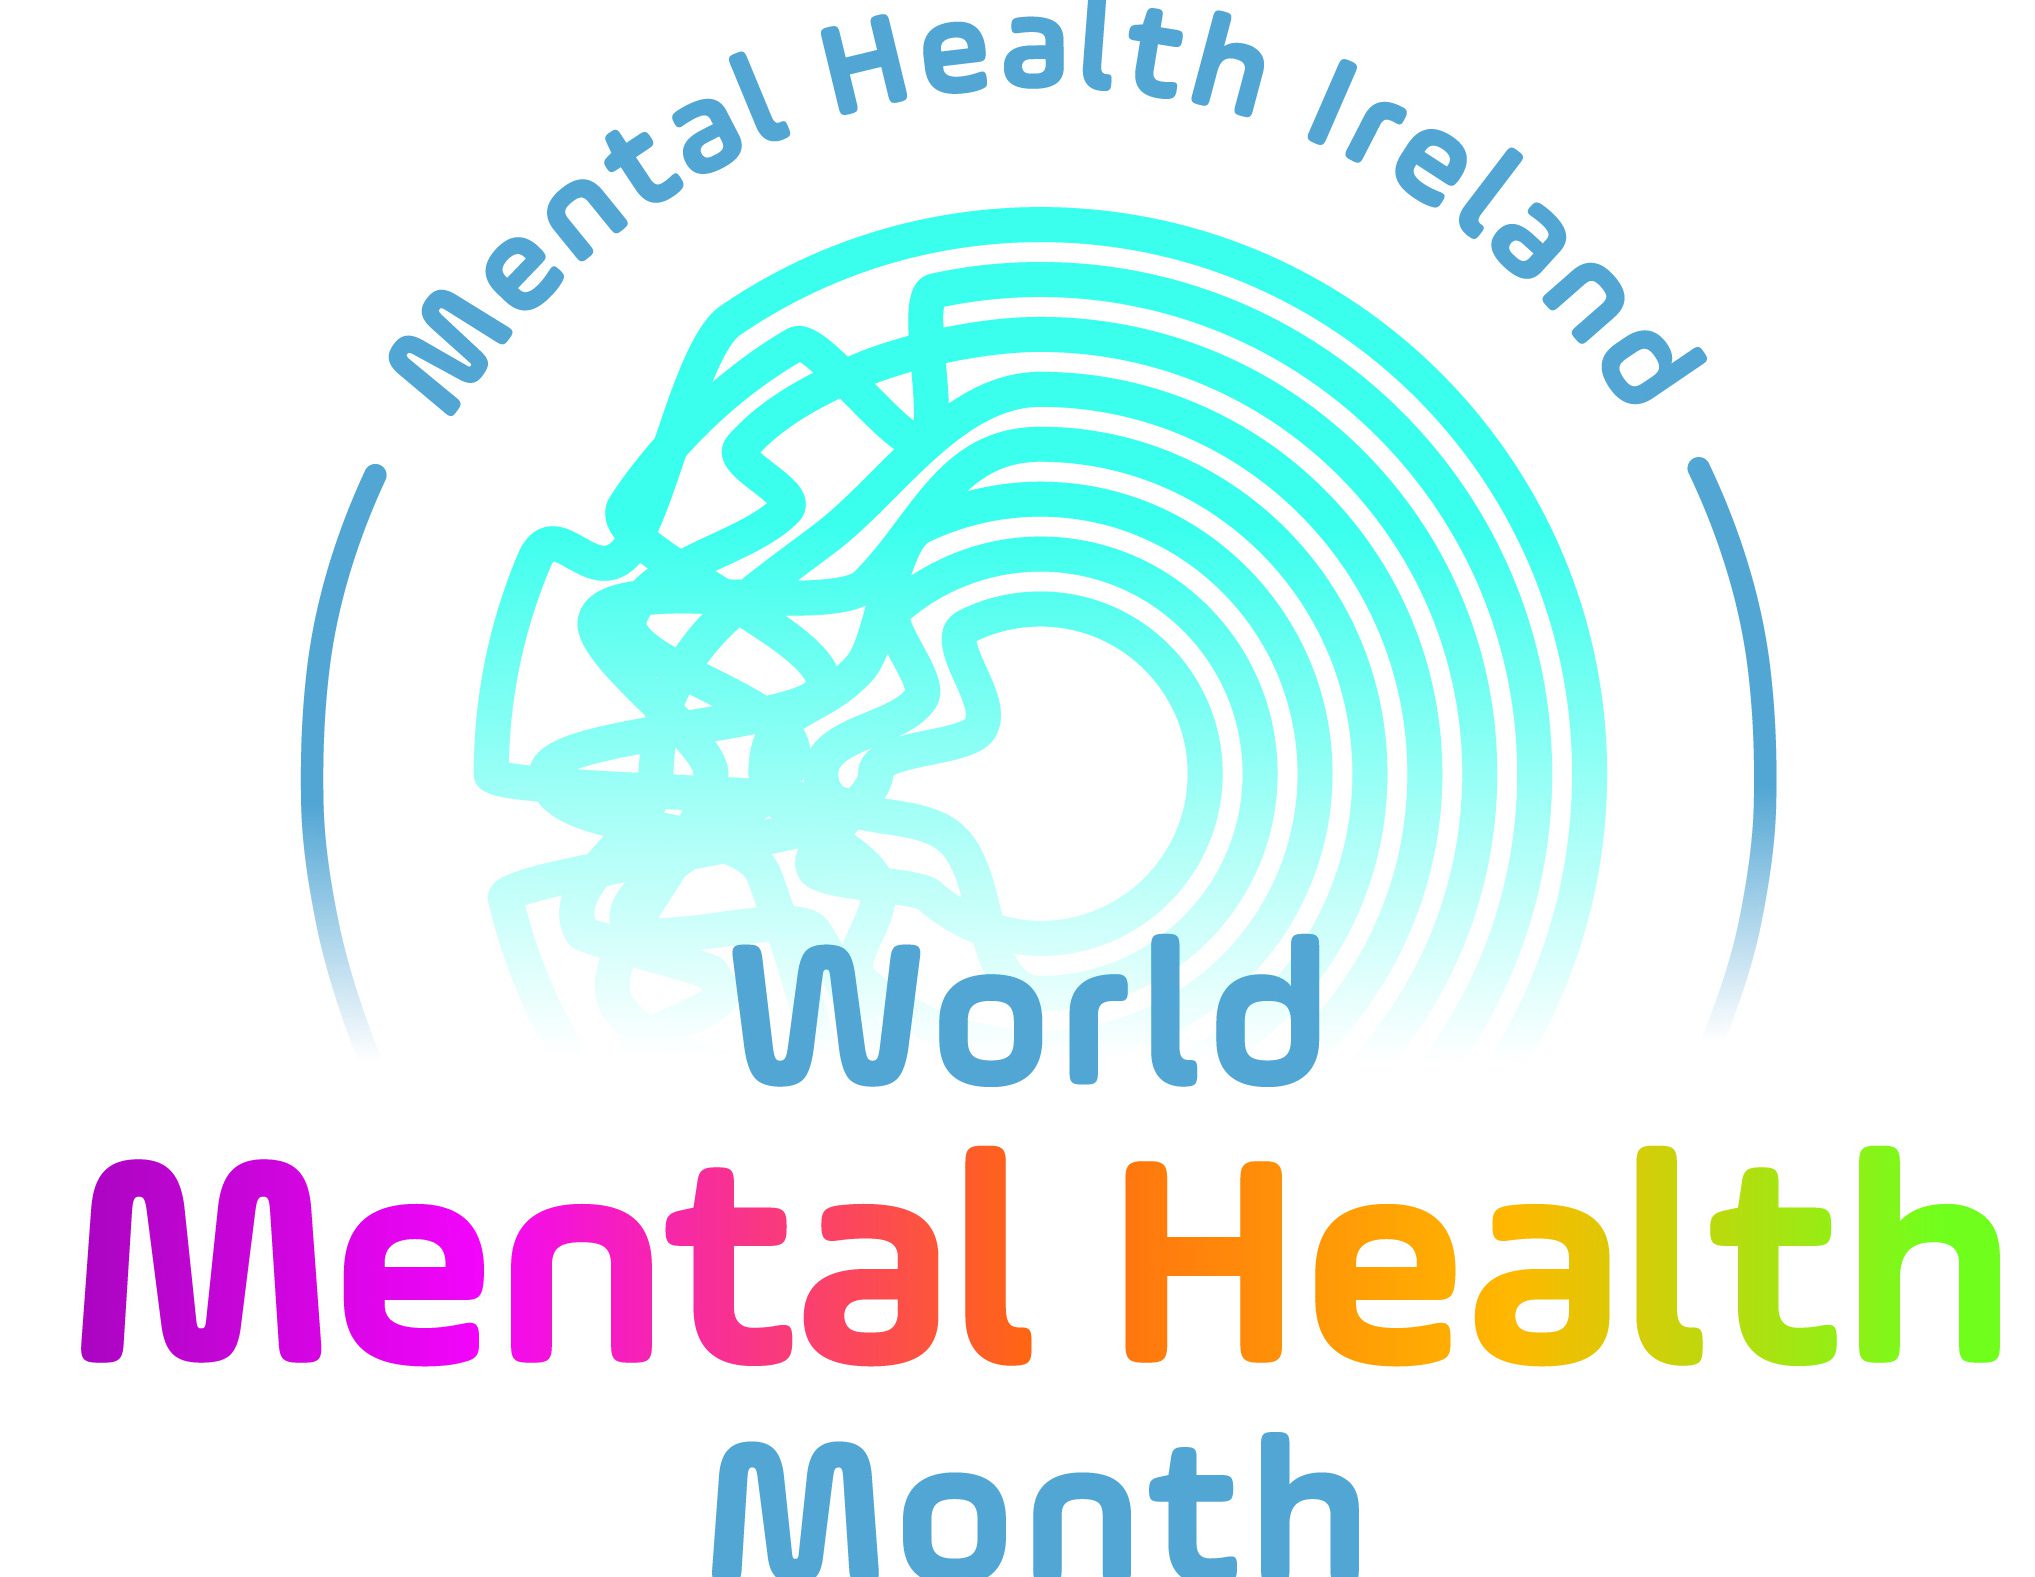 MAKING CHANGES DURING WORLD MENTAL HEALTH MONTH